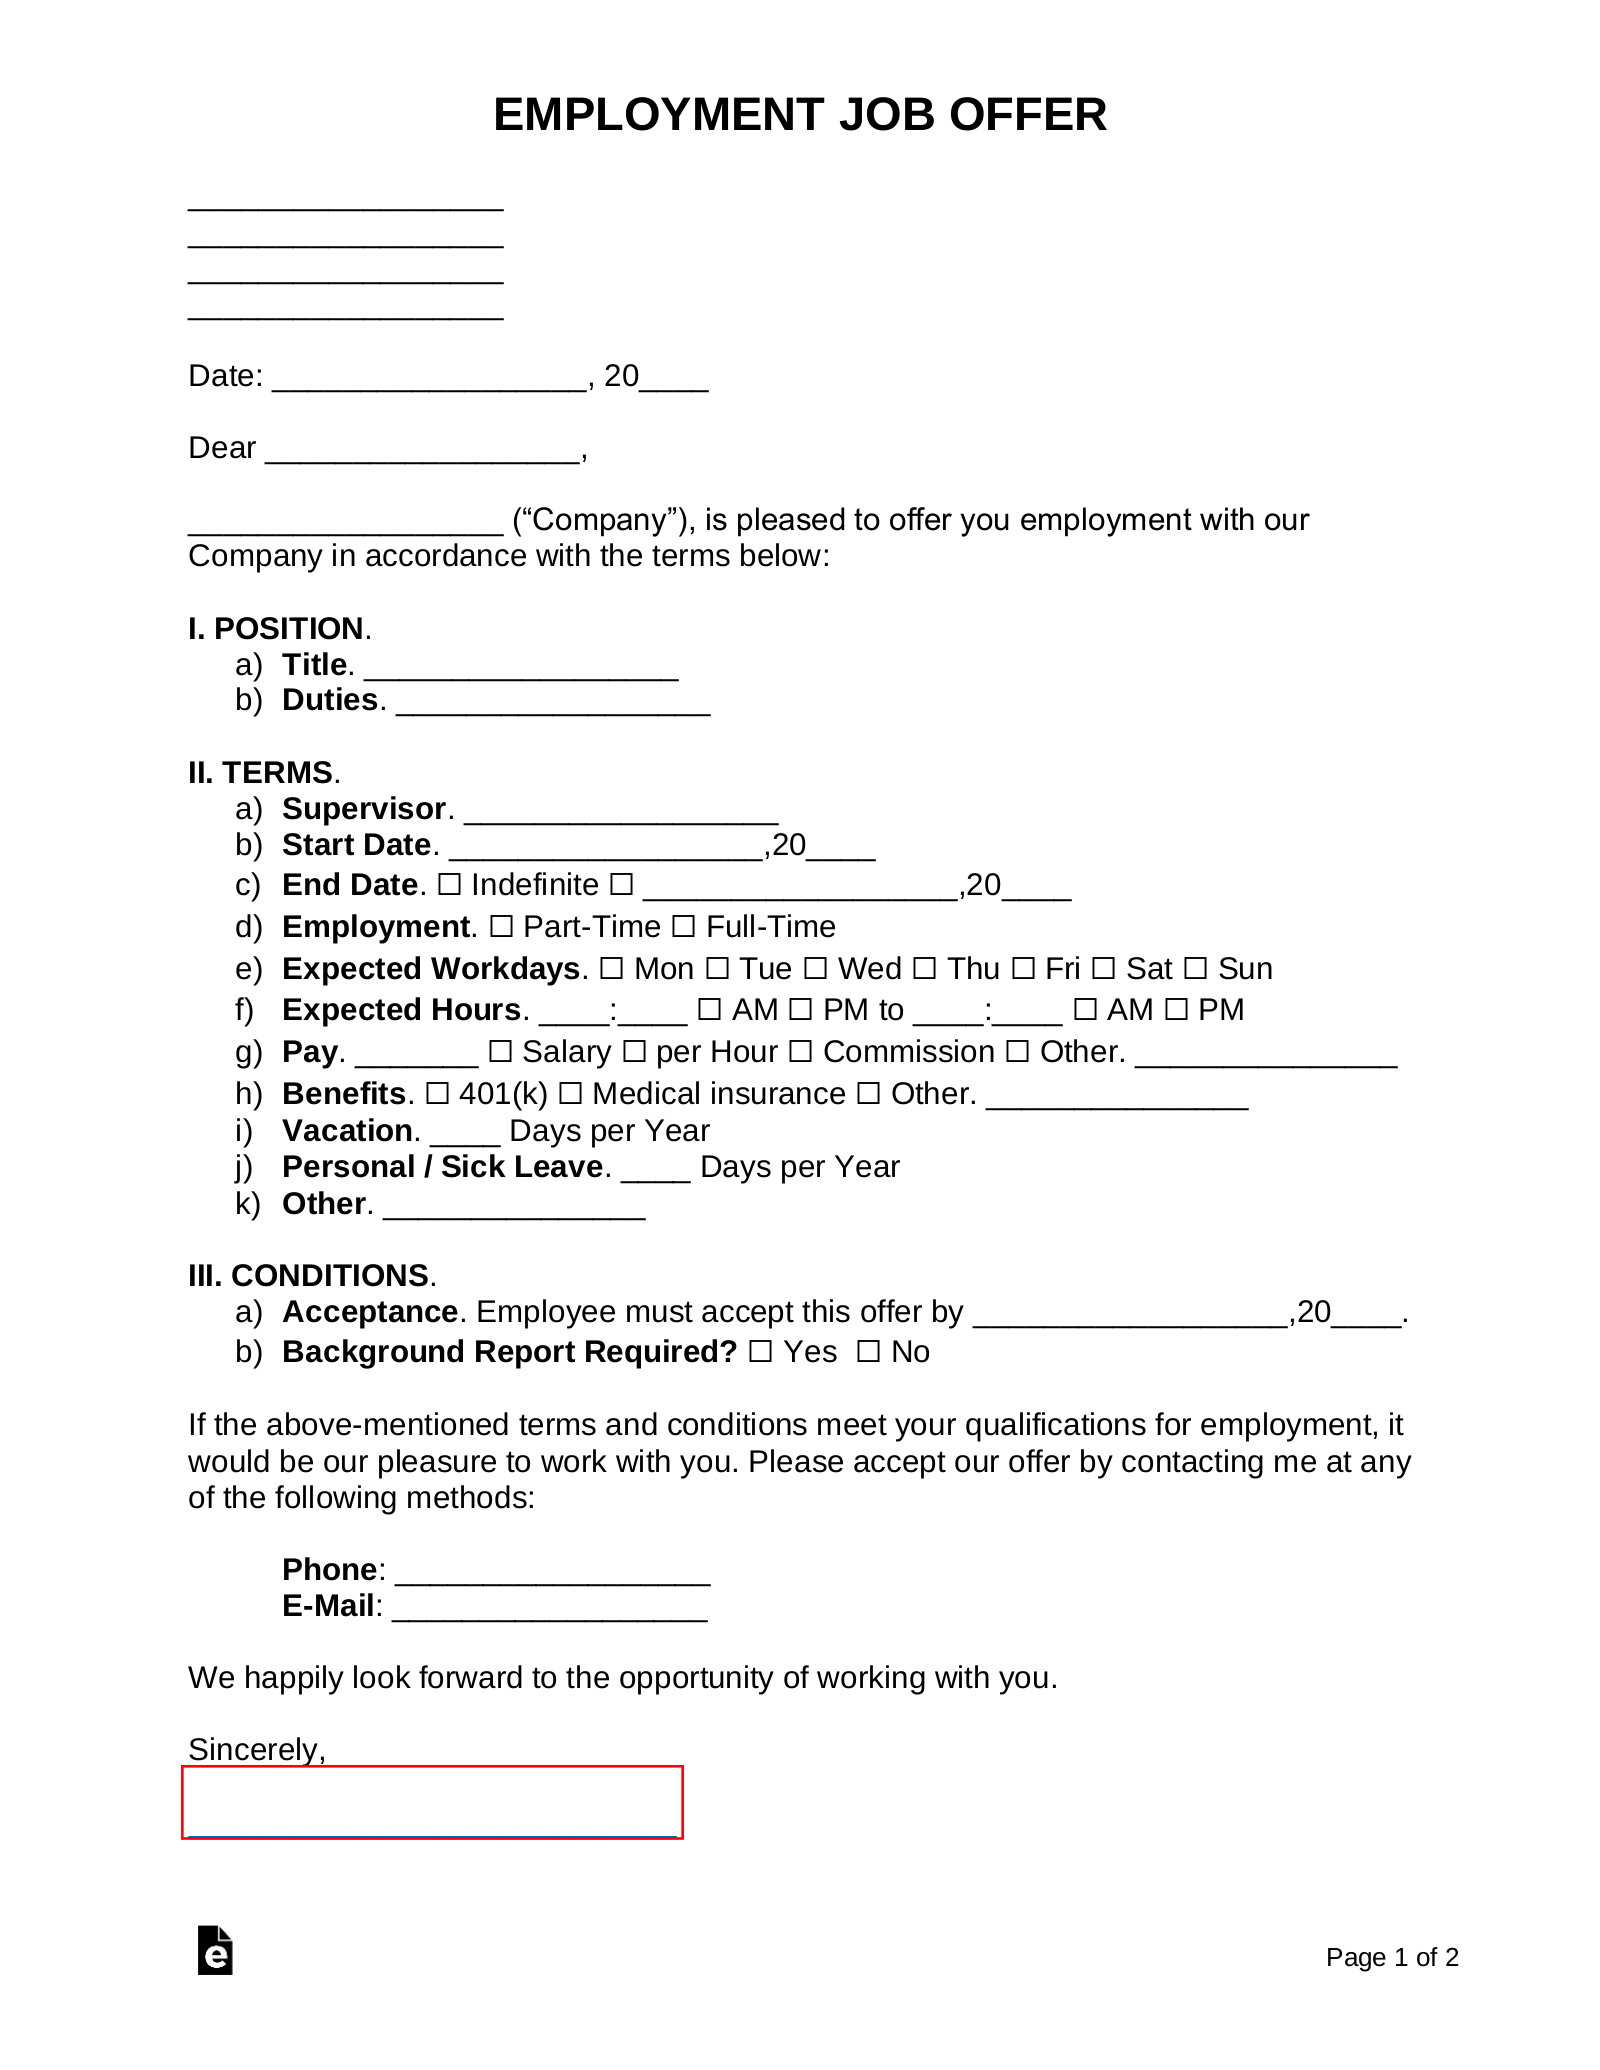 Free Employment Offer Letter Template | Sample - PDF | Word – eForms